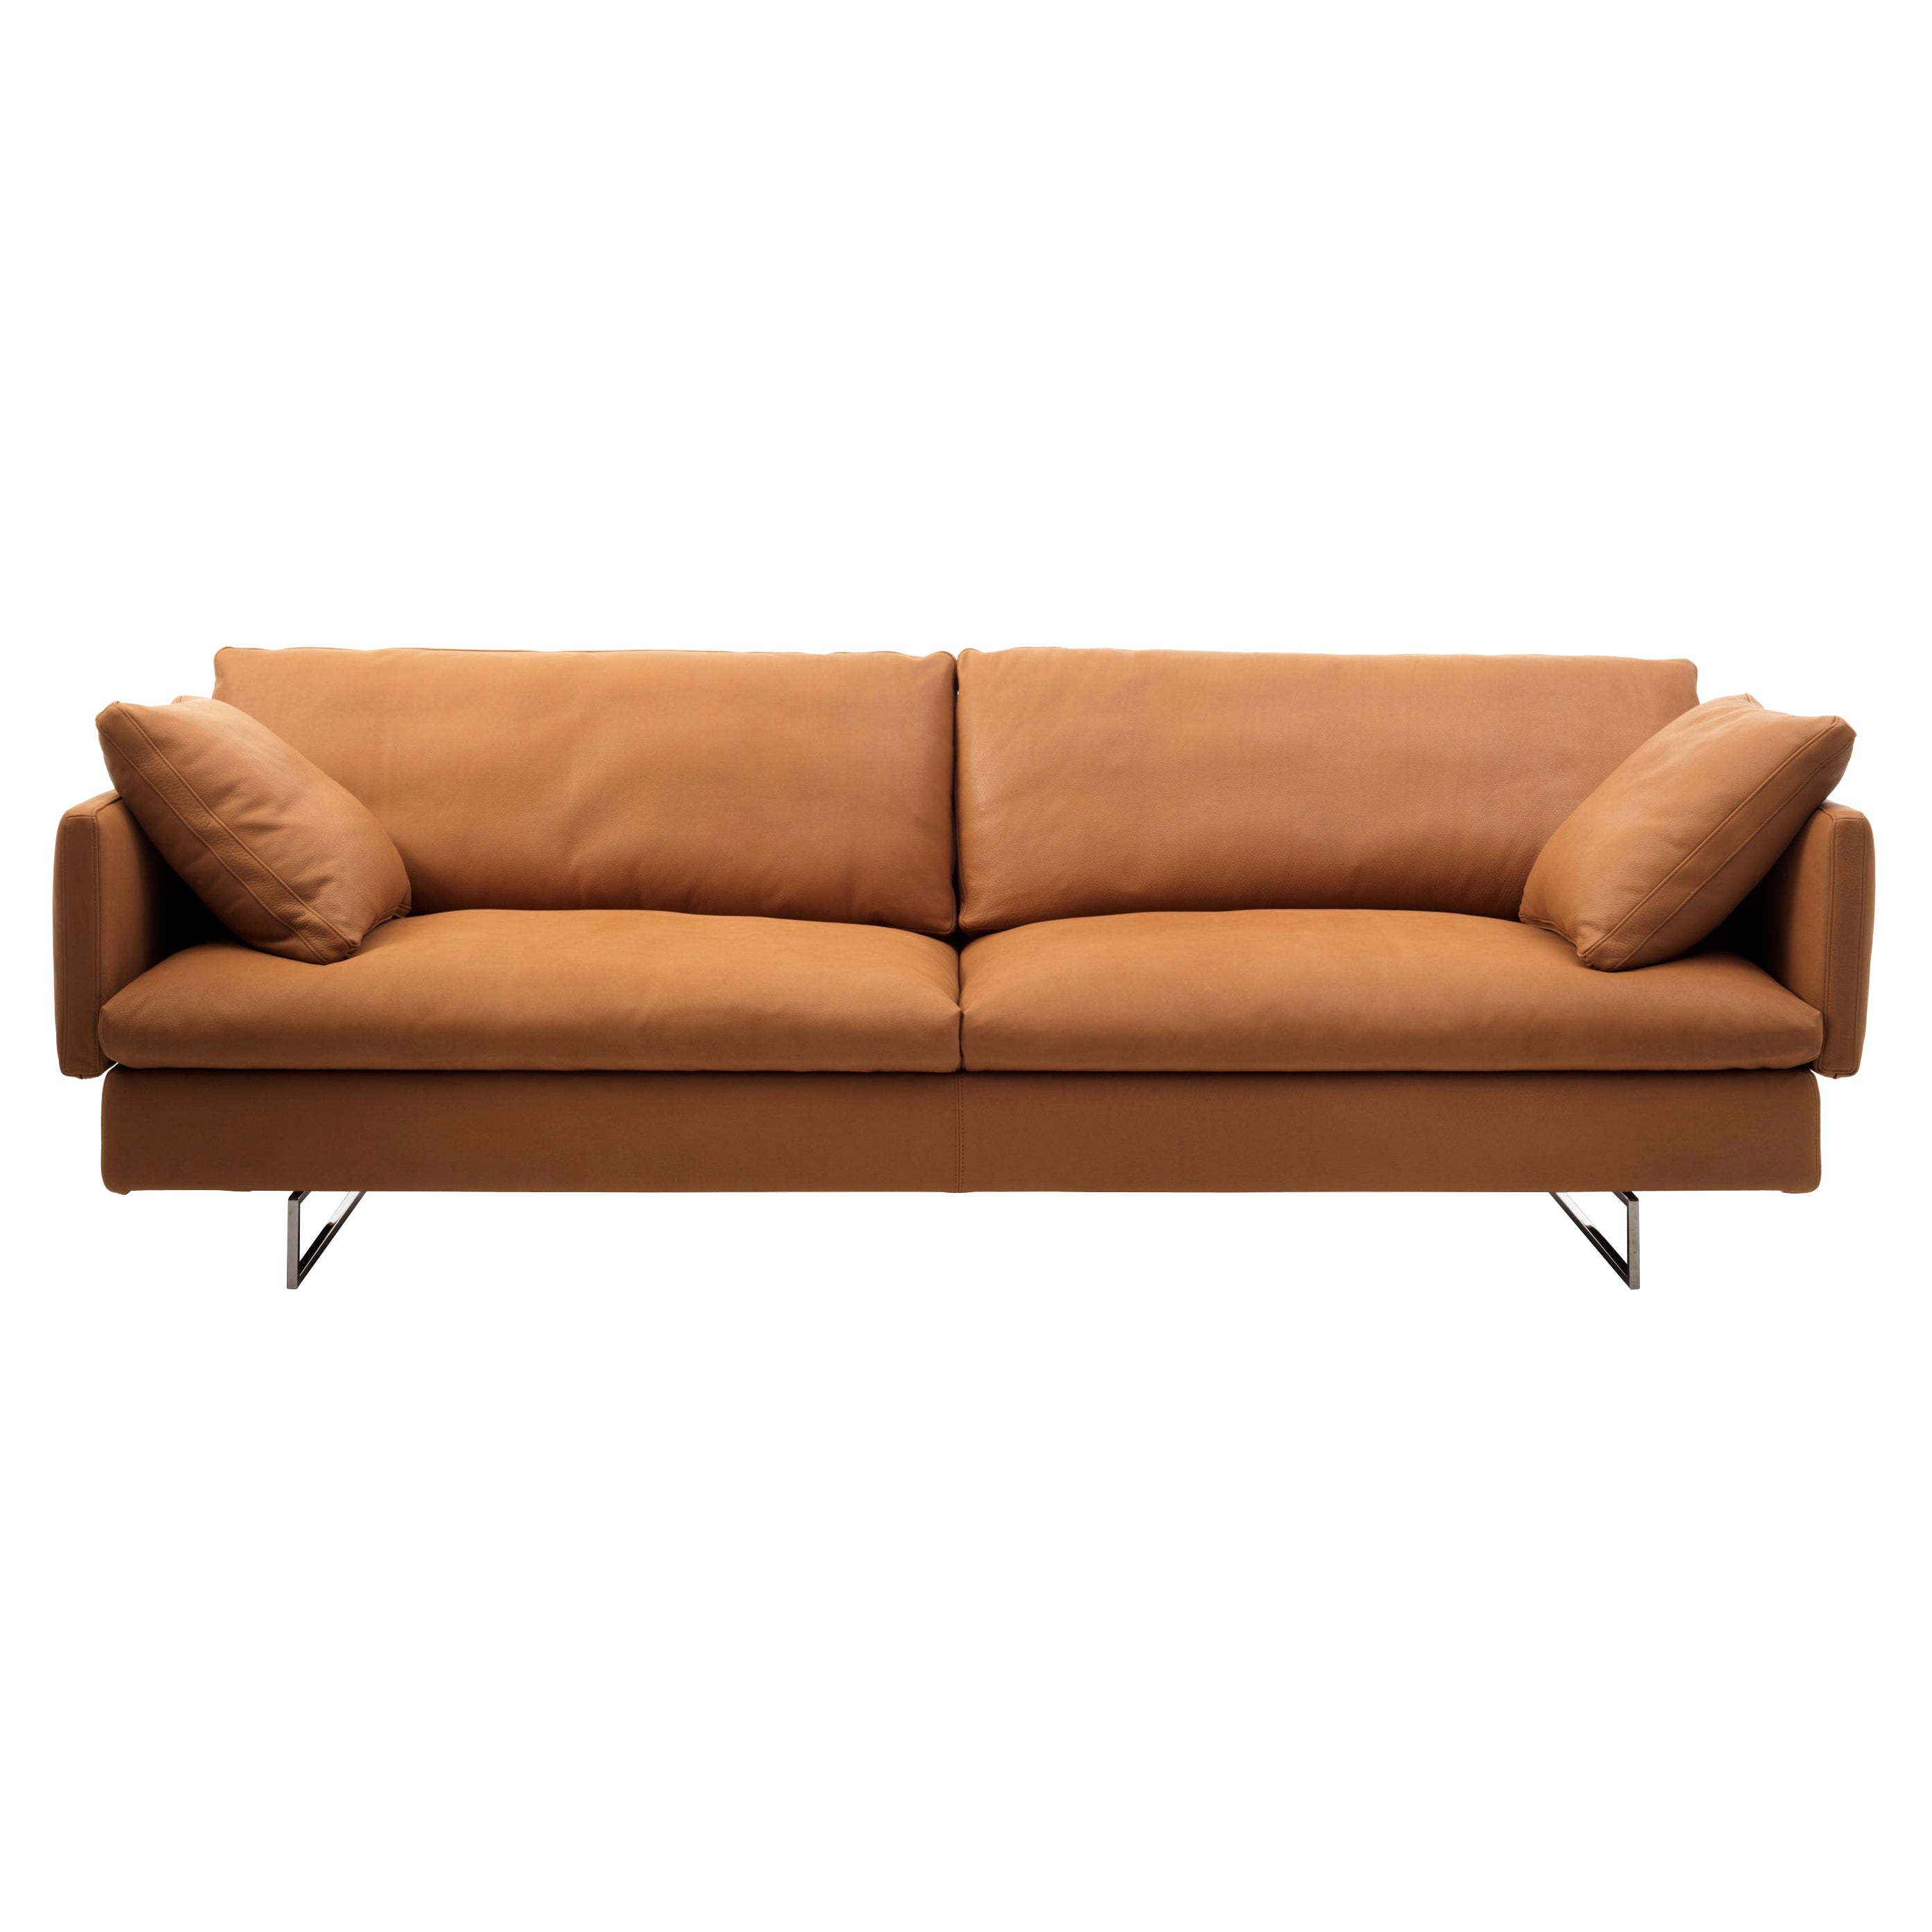 Voyage Medium Sofa in Natural Leather Upholstery & Black Nickel by Sergio Bicego For Sale